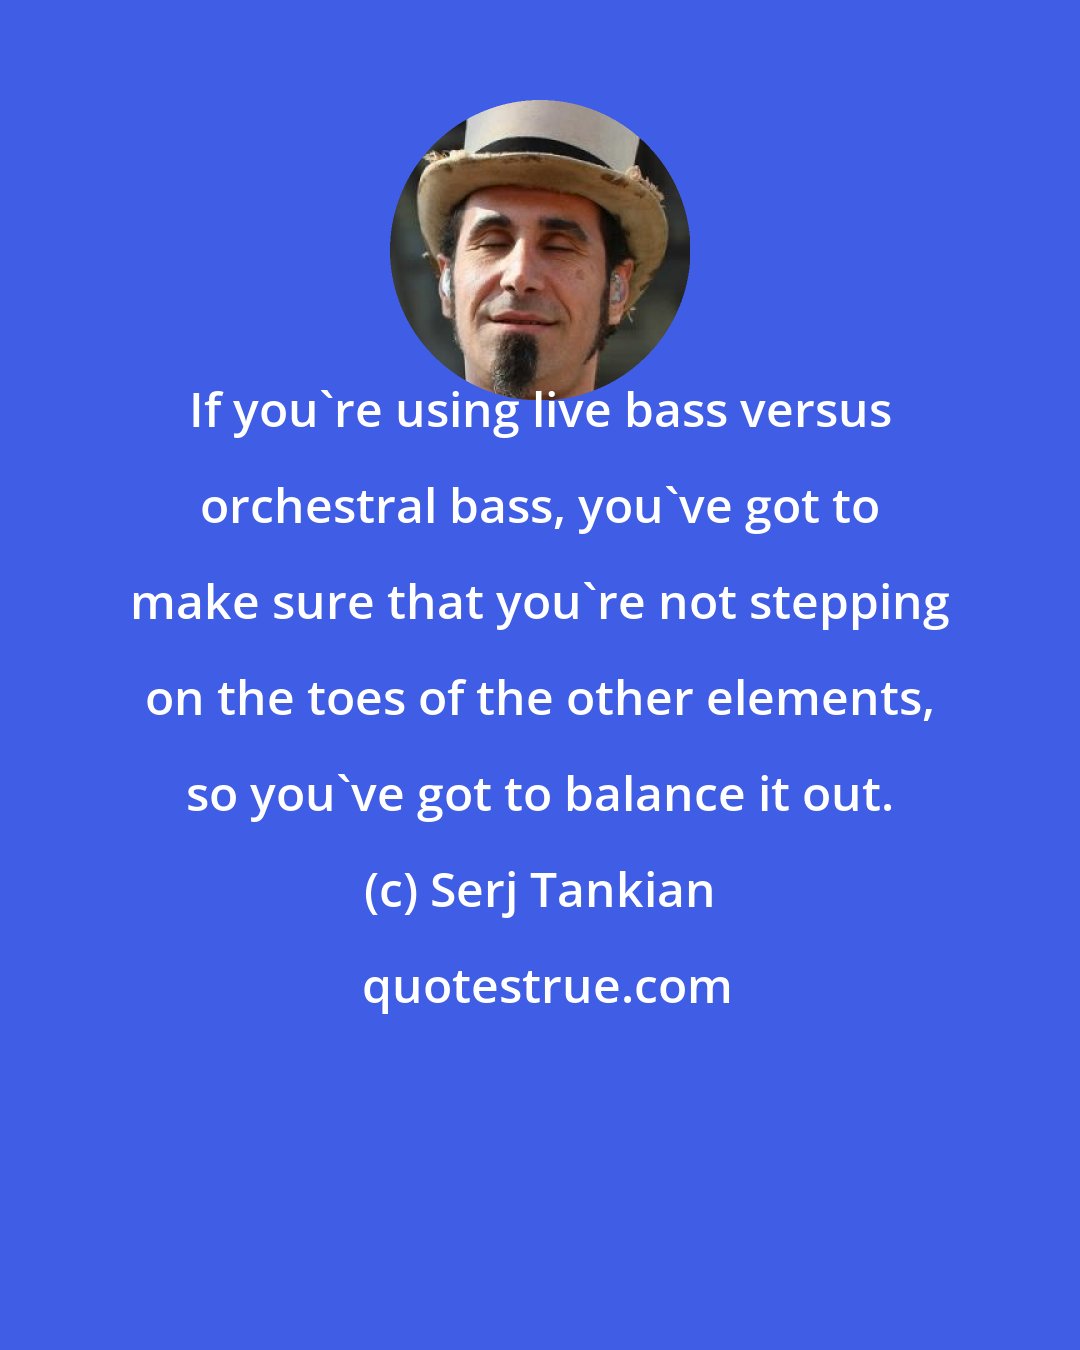 Serj Tankian: If you're using live bass versus orchestral bass, you've got to make sure that you're not stepping on the toes of the other elements, so you've got to balance it out.